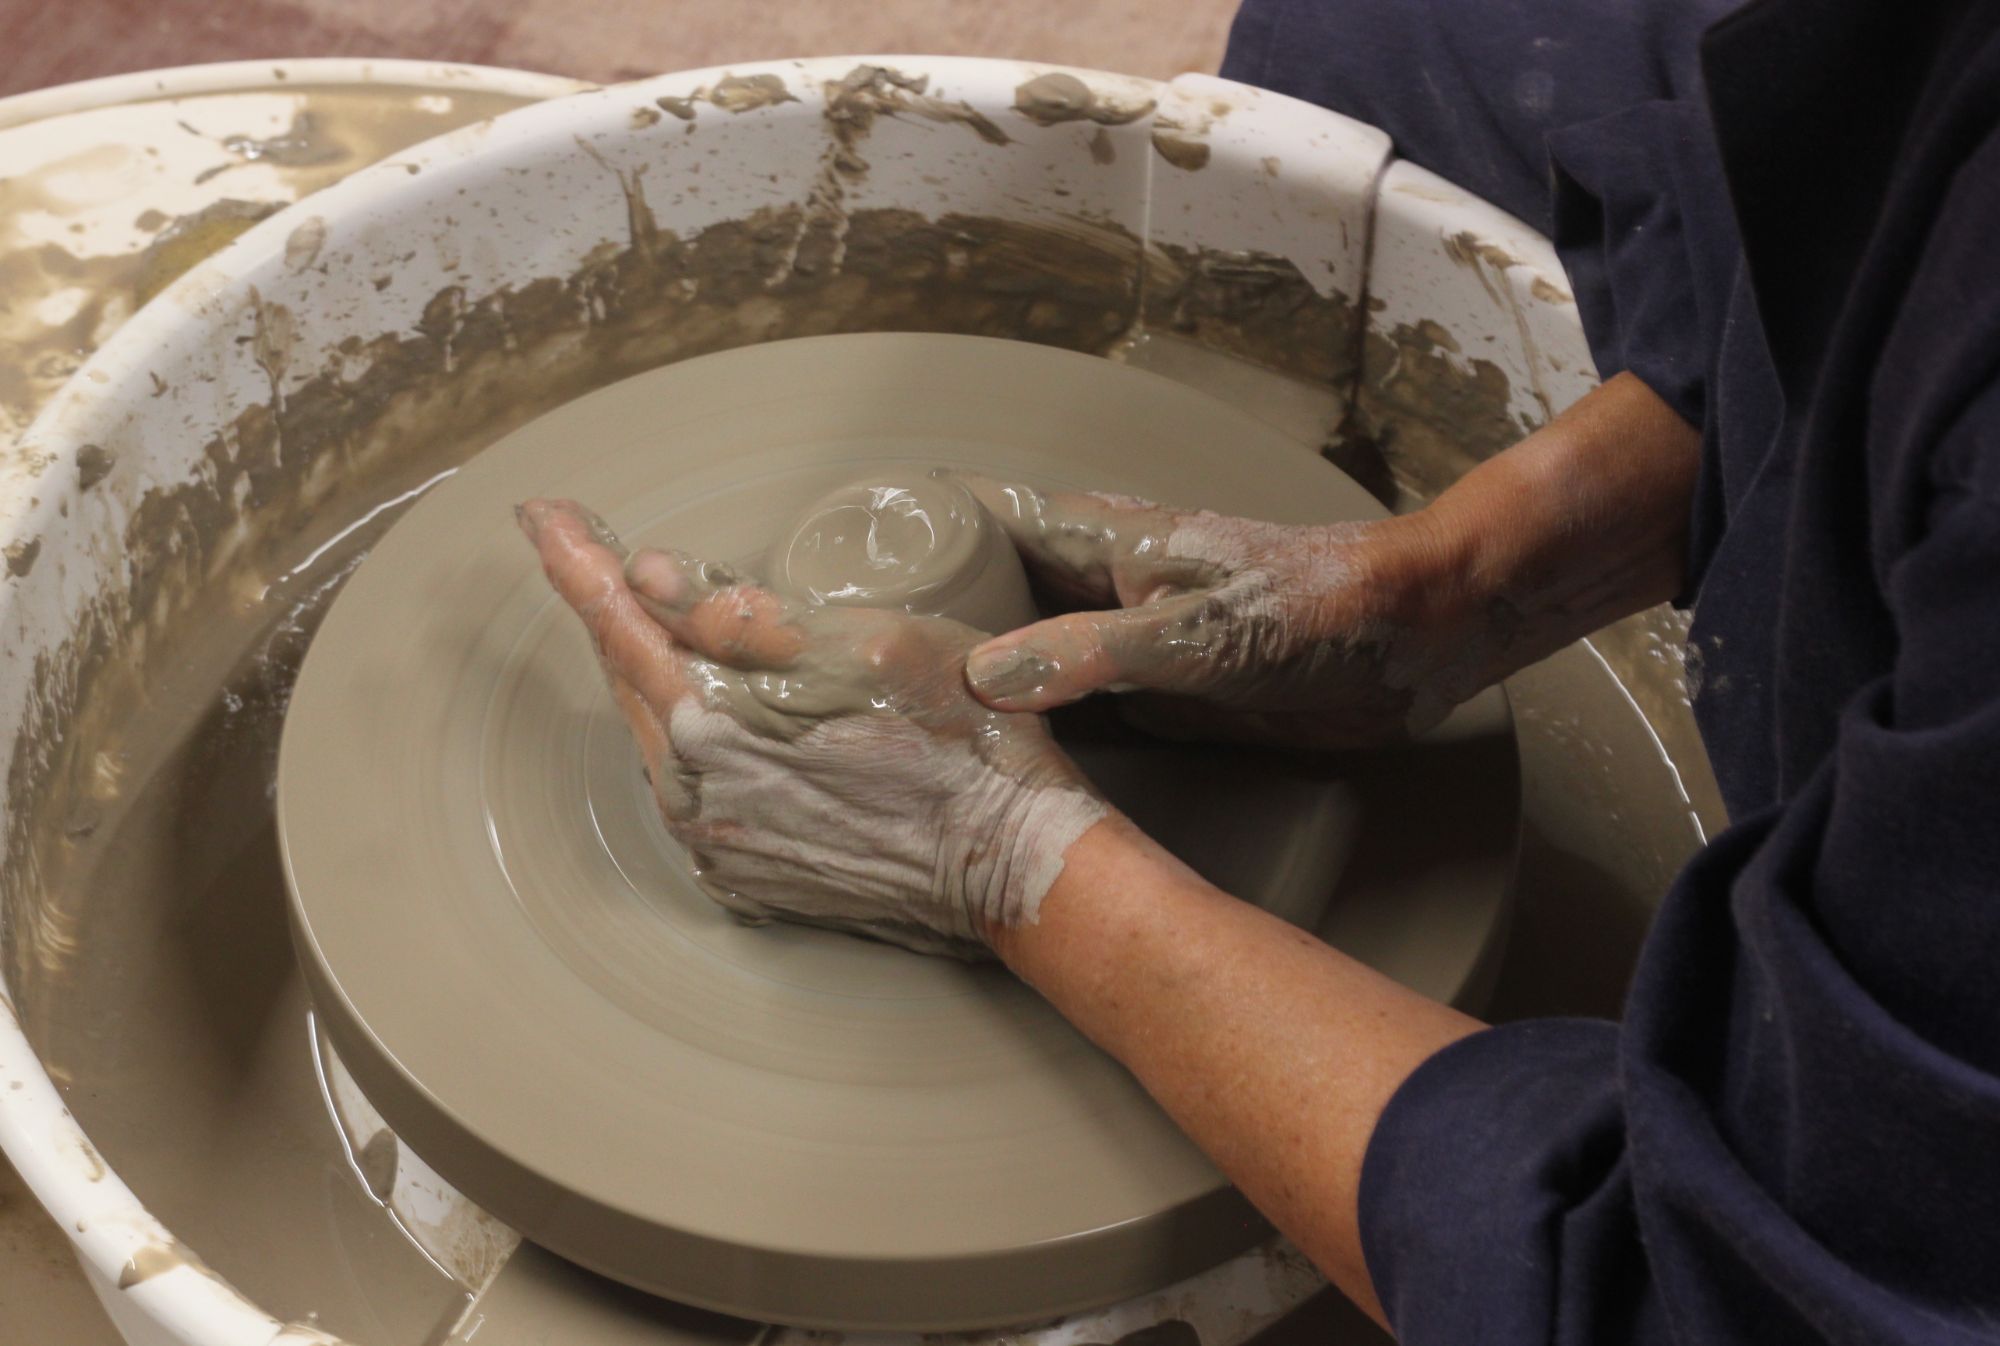 Potters wheel throwing centring clay